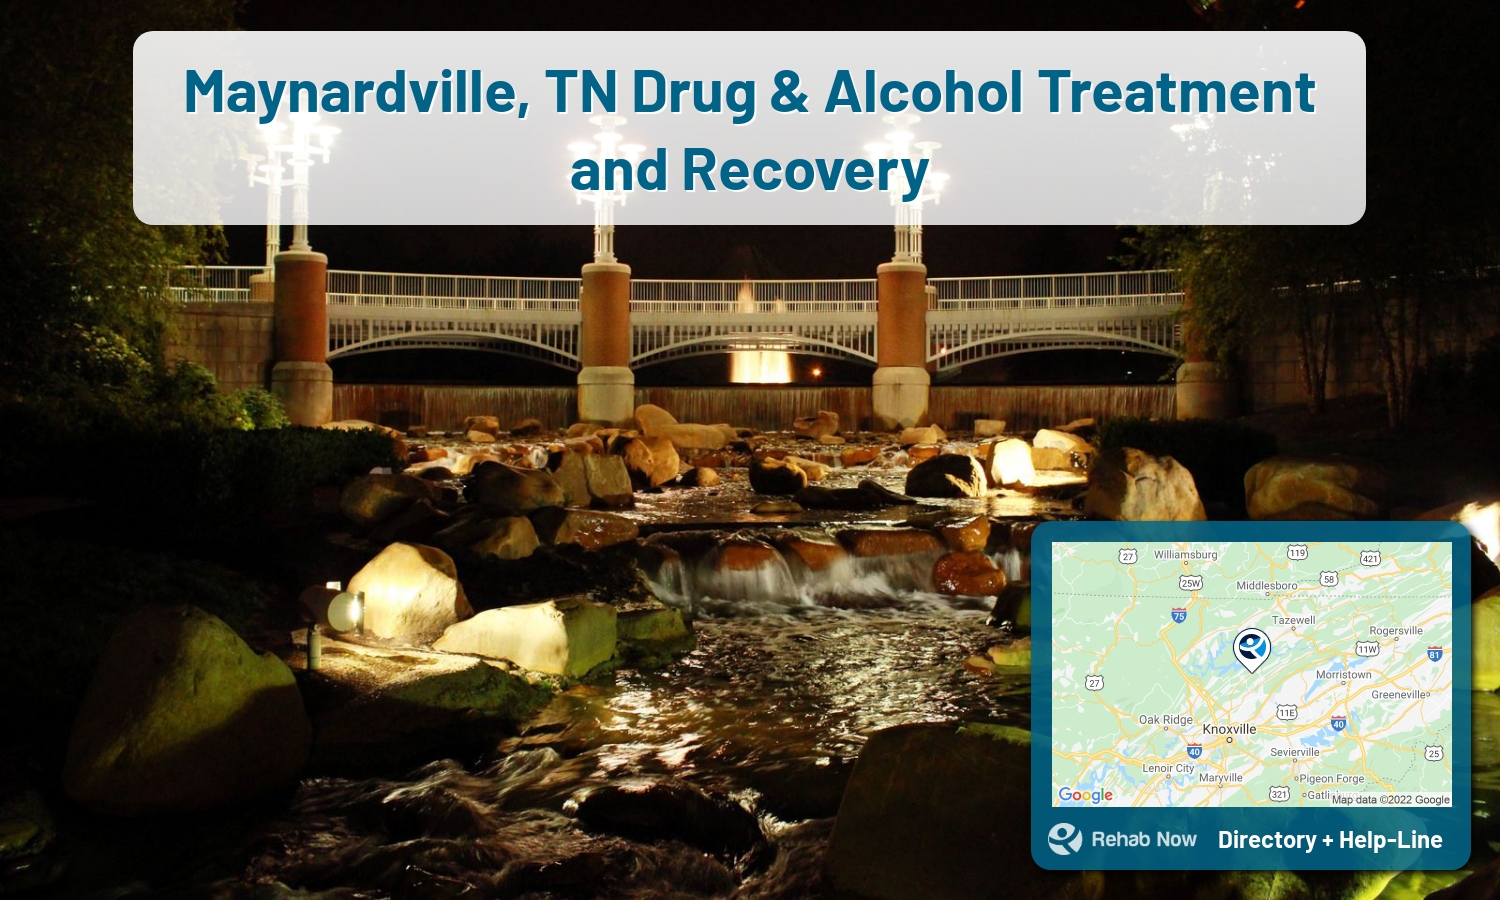 Our experts can help you find treatment now in Maynardville, Tennessee. We list drug rehab and alcohol centers in Tennessee.